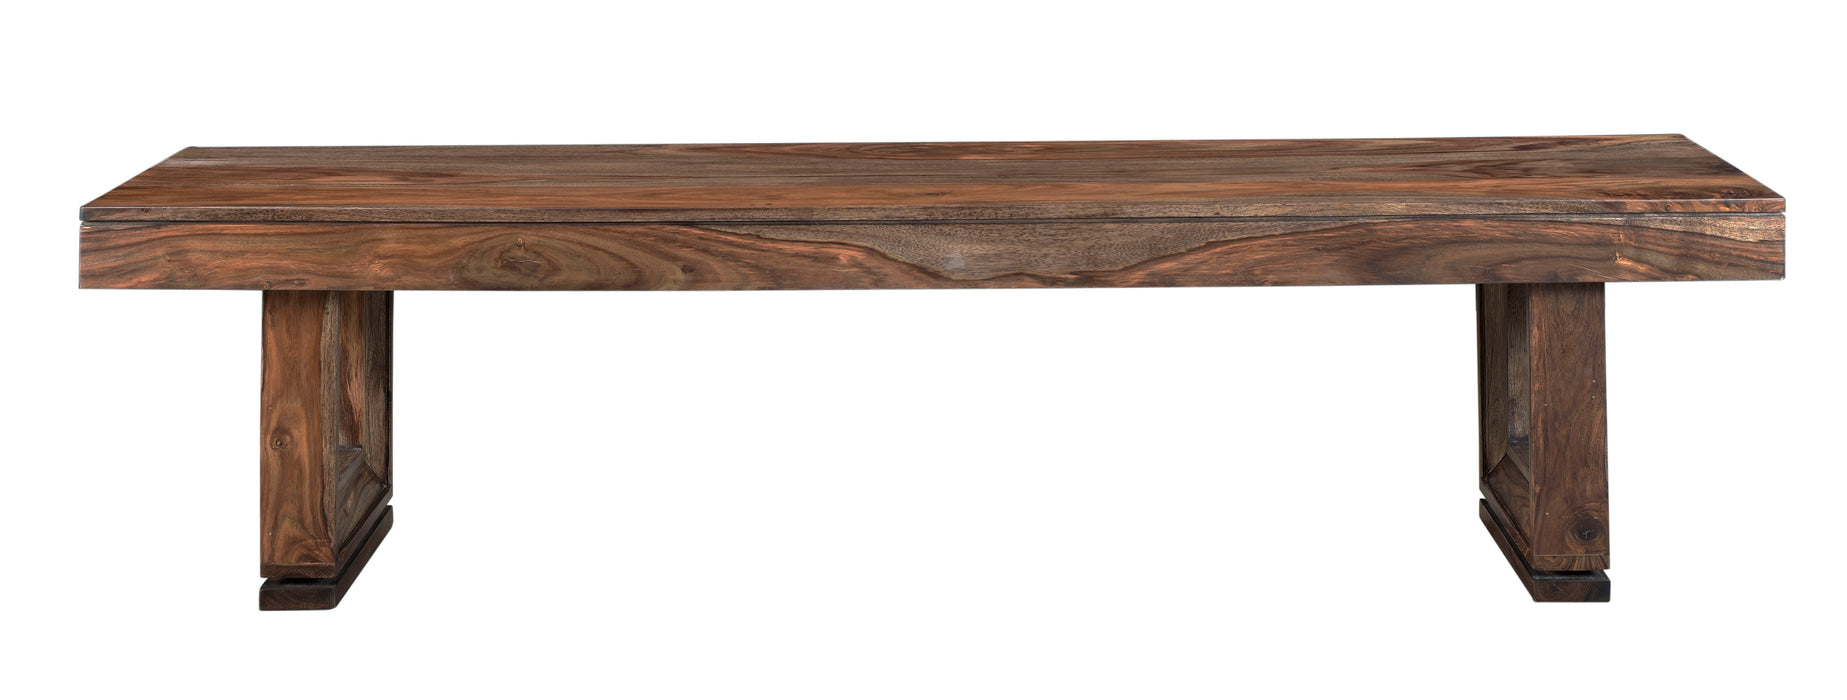 Brownstone - Dining Bench - Nut Brown